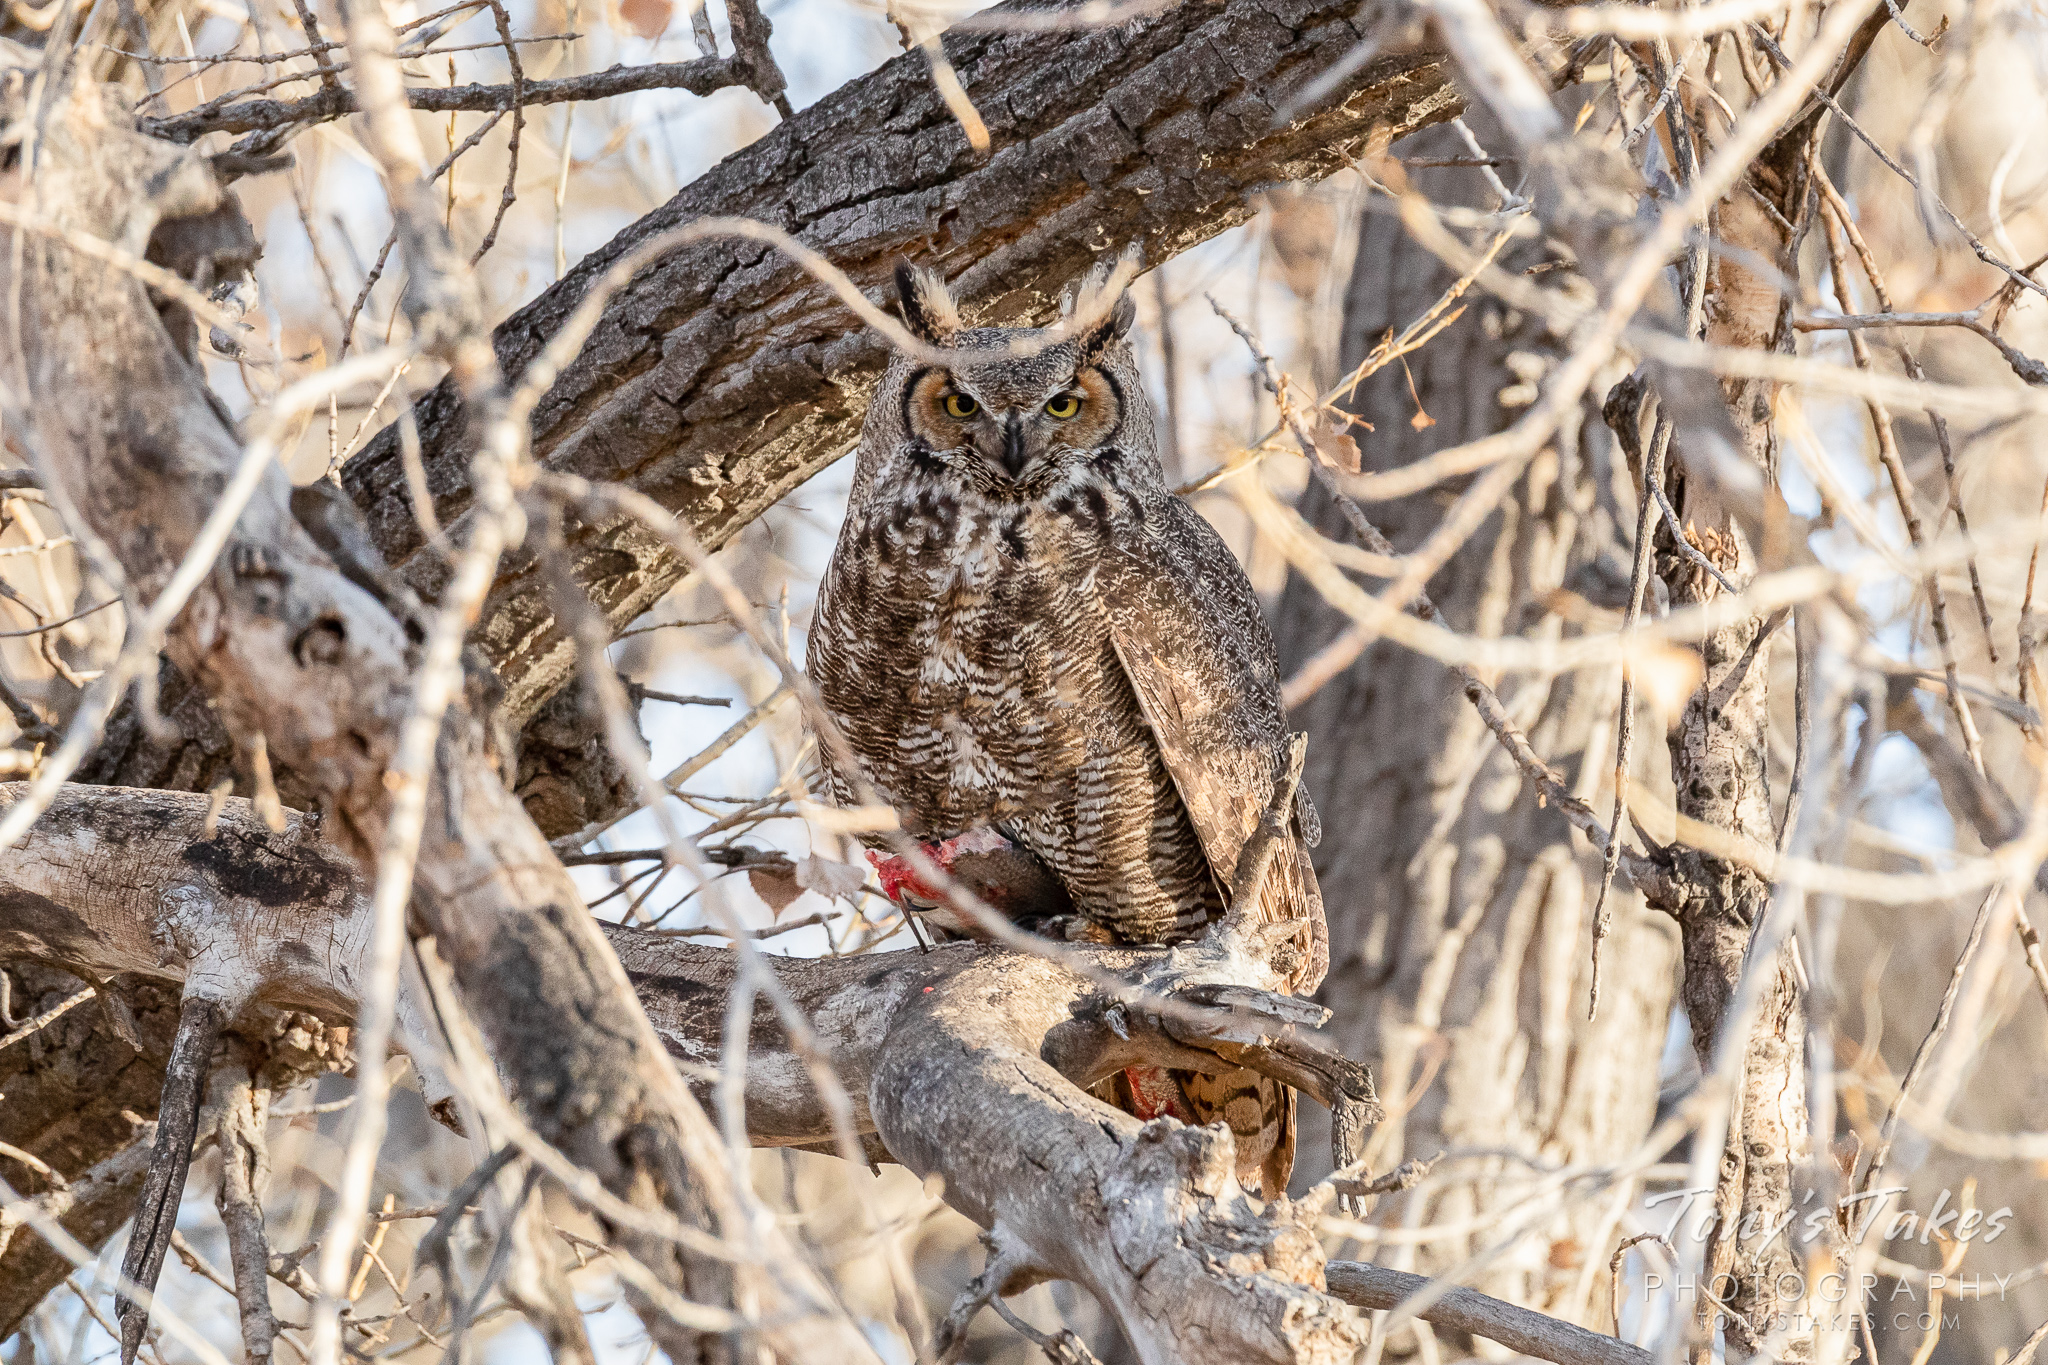 A great horned owl guards a fish it was eating. (© Tony’s Takes)